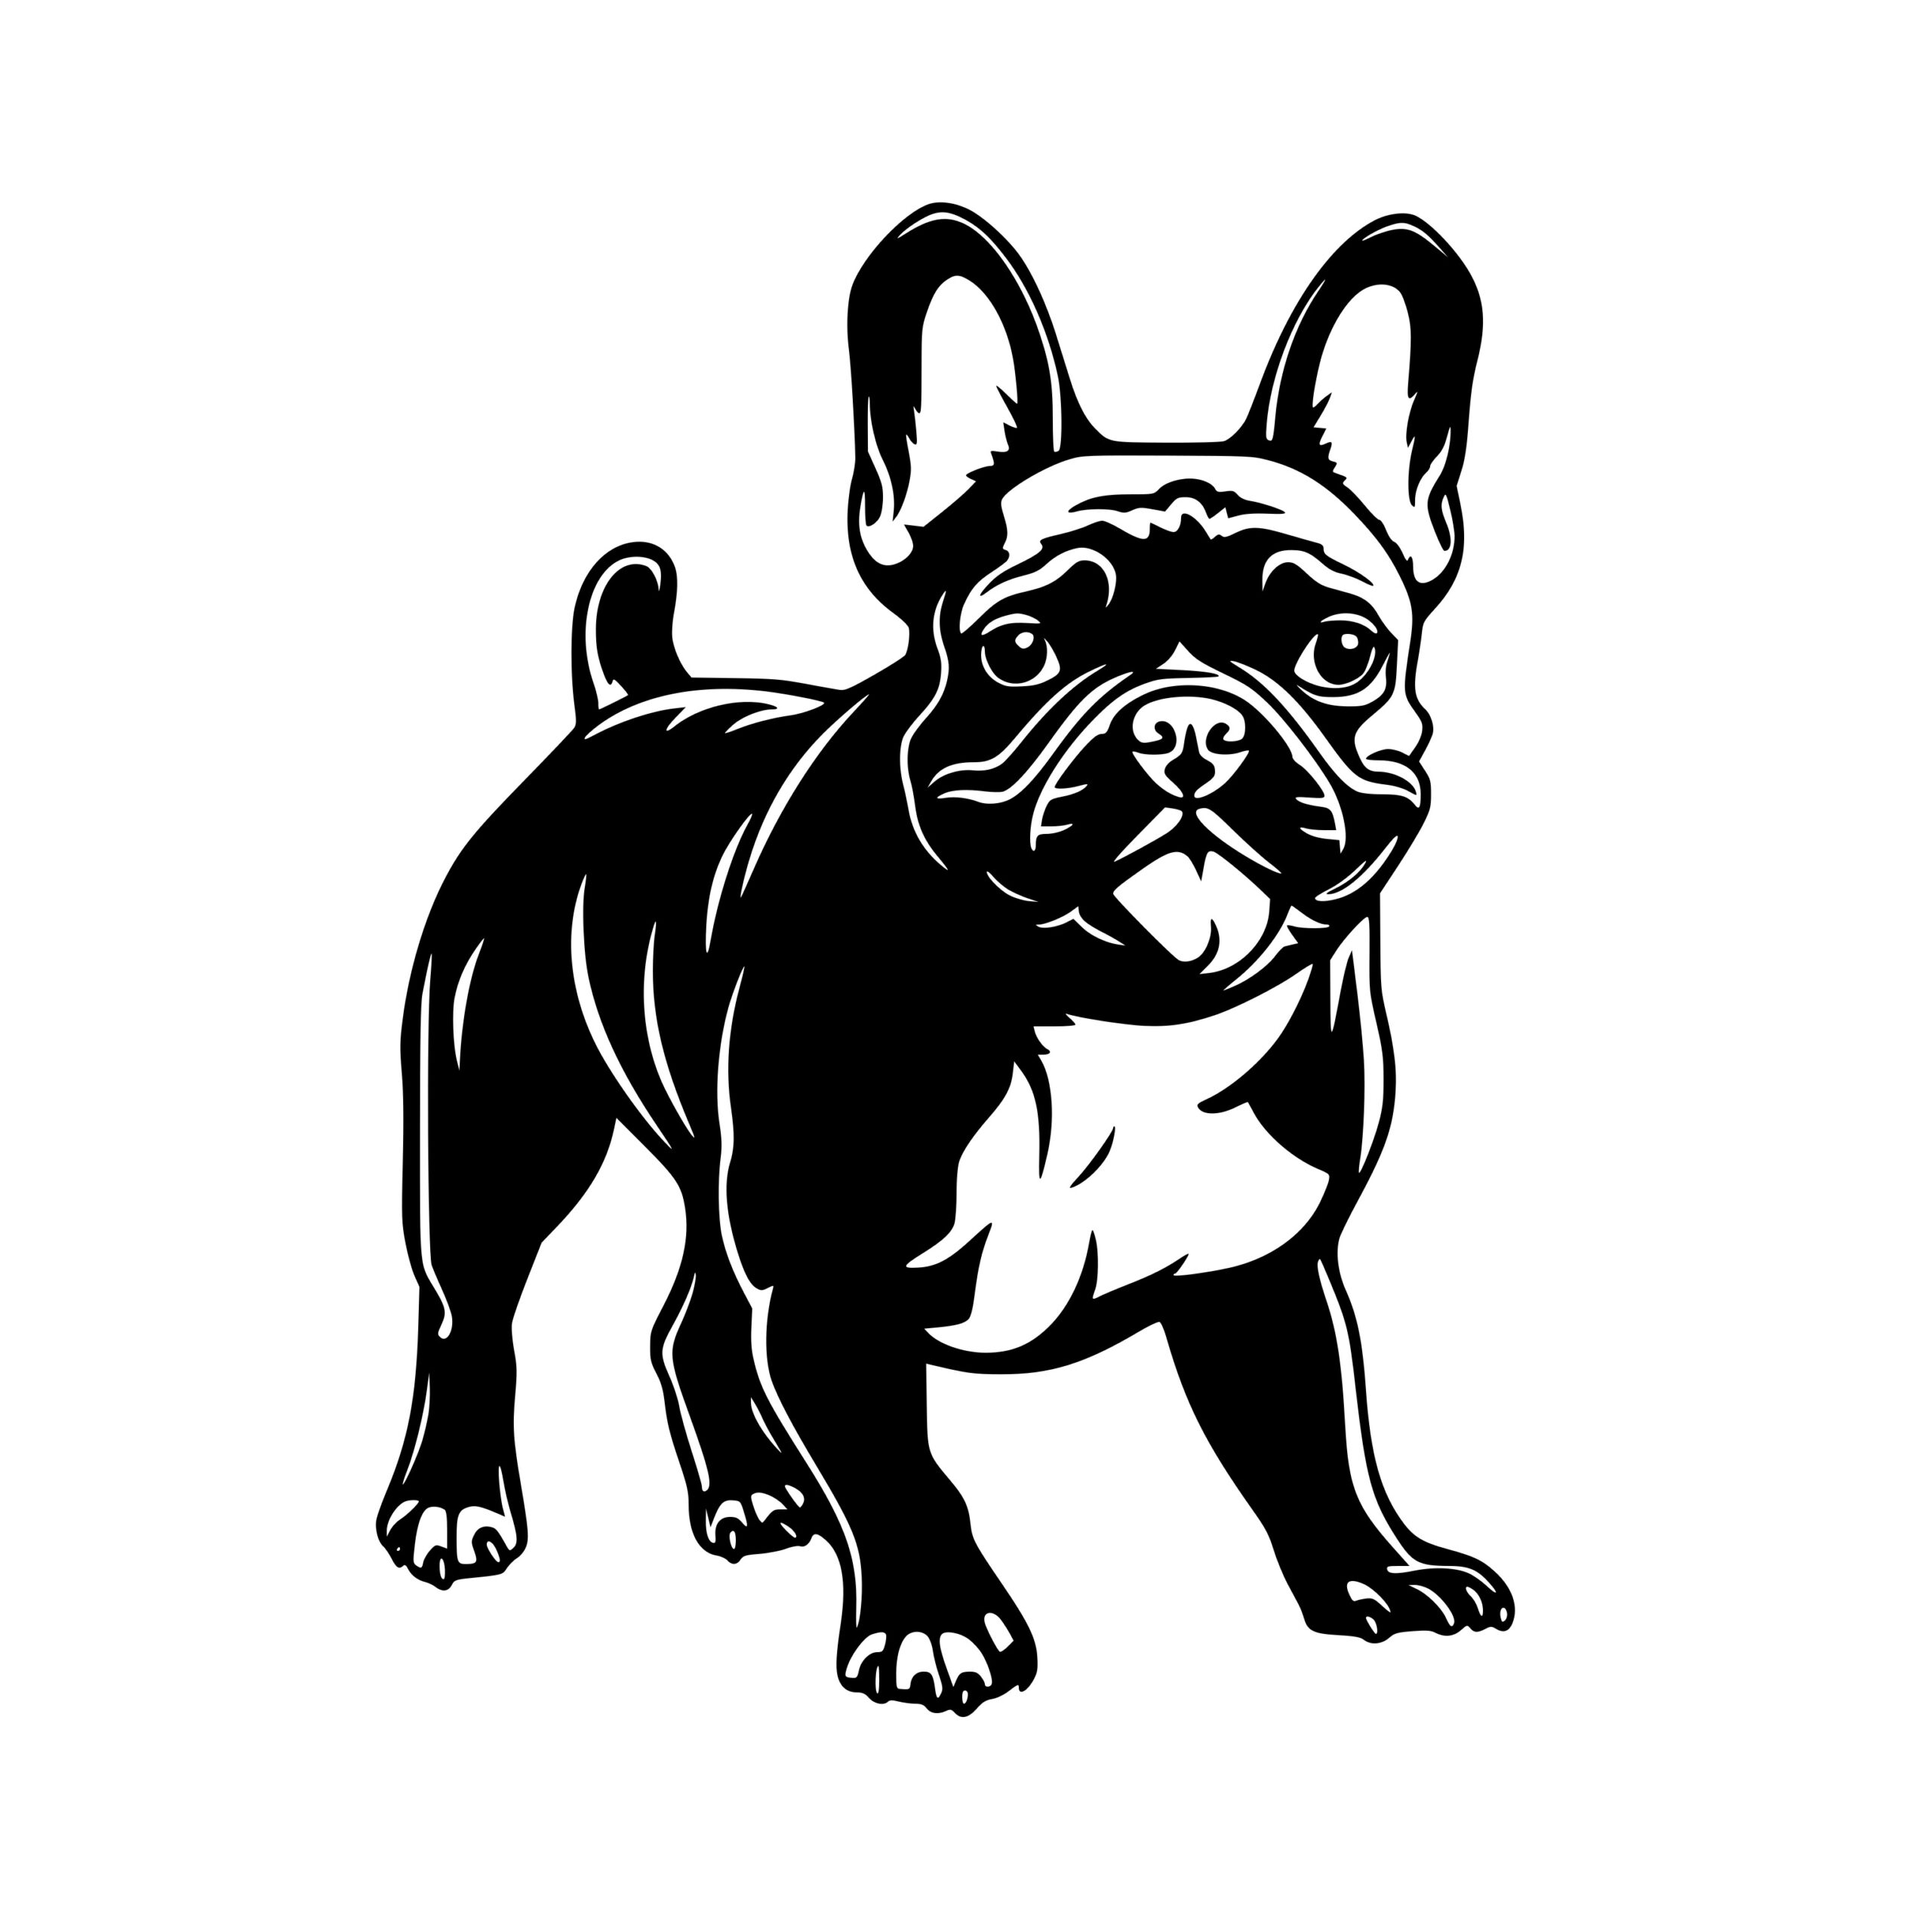 Realistic French Bulldog Image for Cricut, Silhouette, and Laser Machines